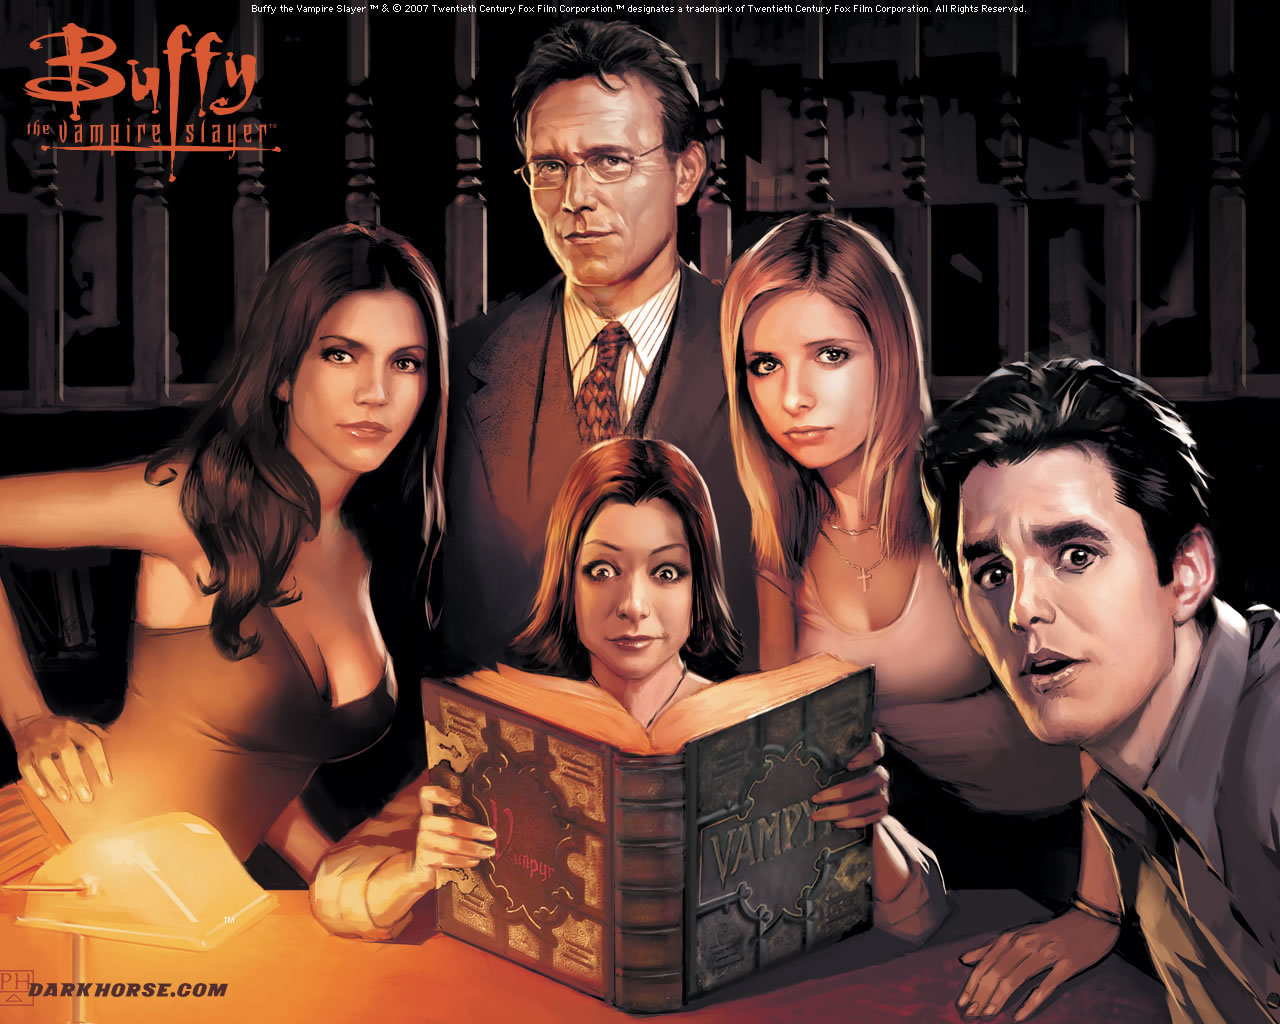 buffy the vampire slayer, cinema, people, pictures